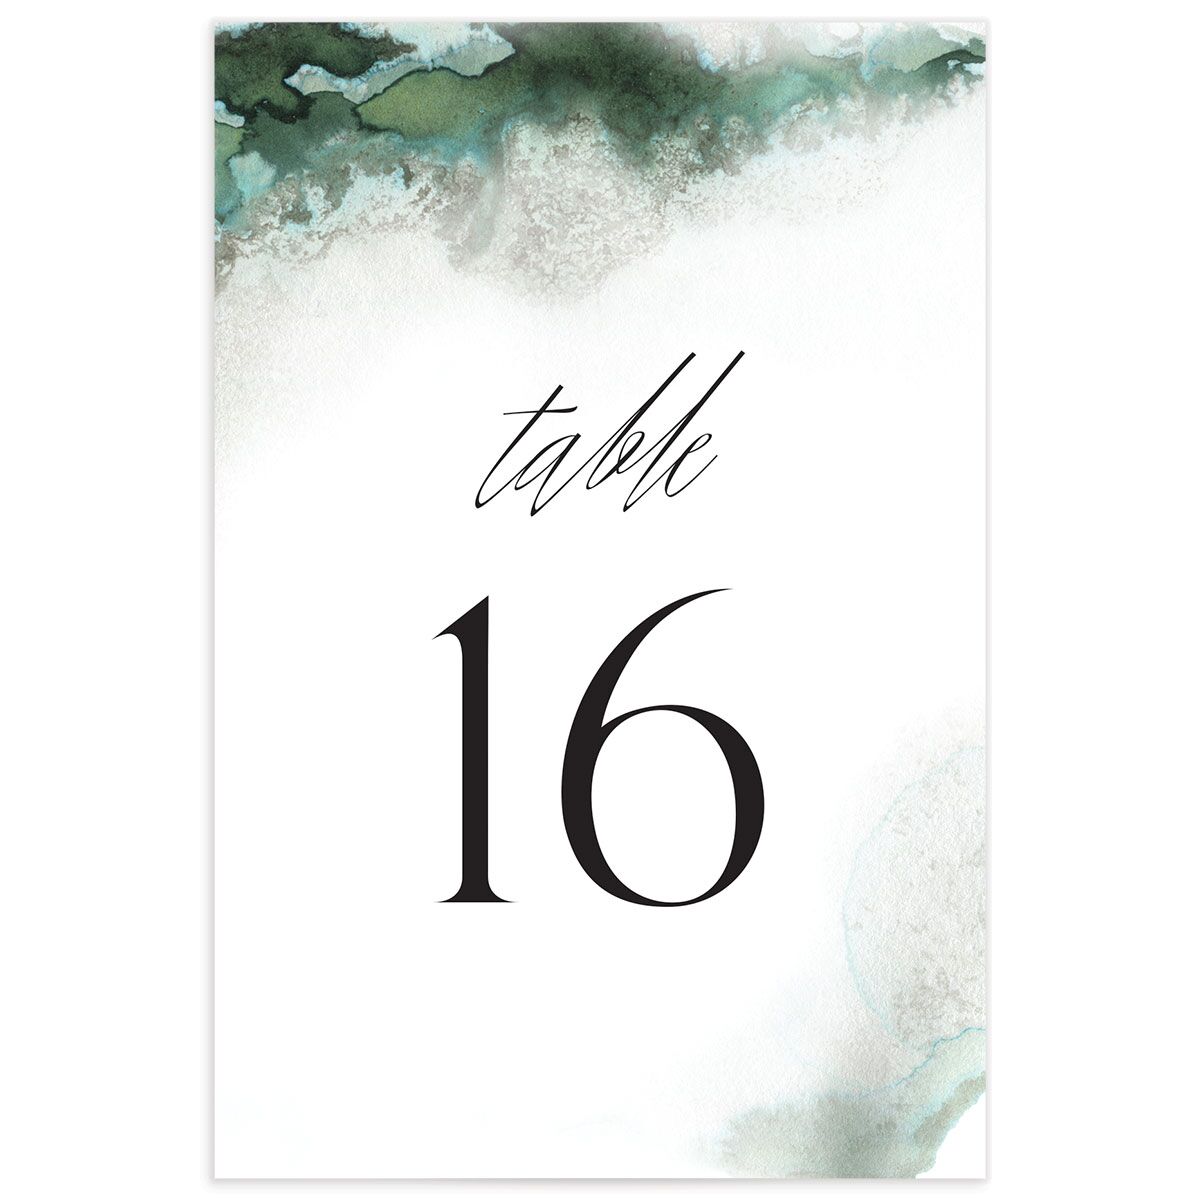 Ethereal Watercolor Table Numbers front in Jewel Green